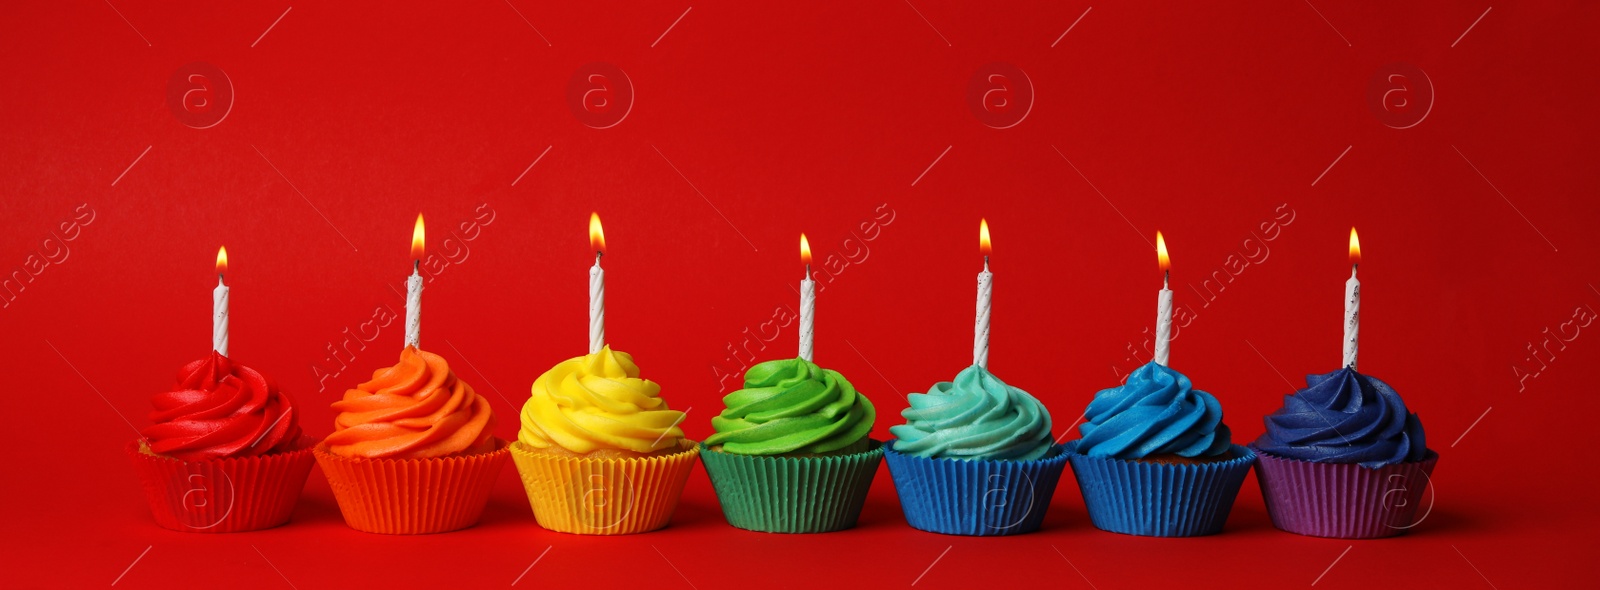 Photo of Delicious birthday cupcakes with candles on red background